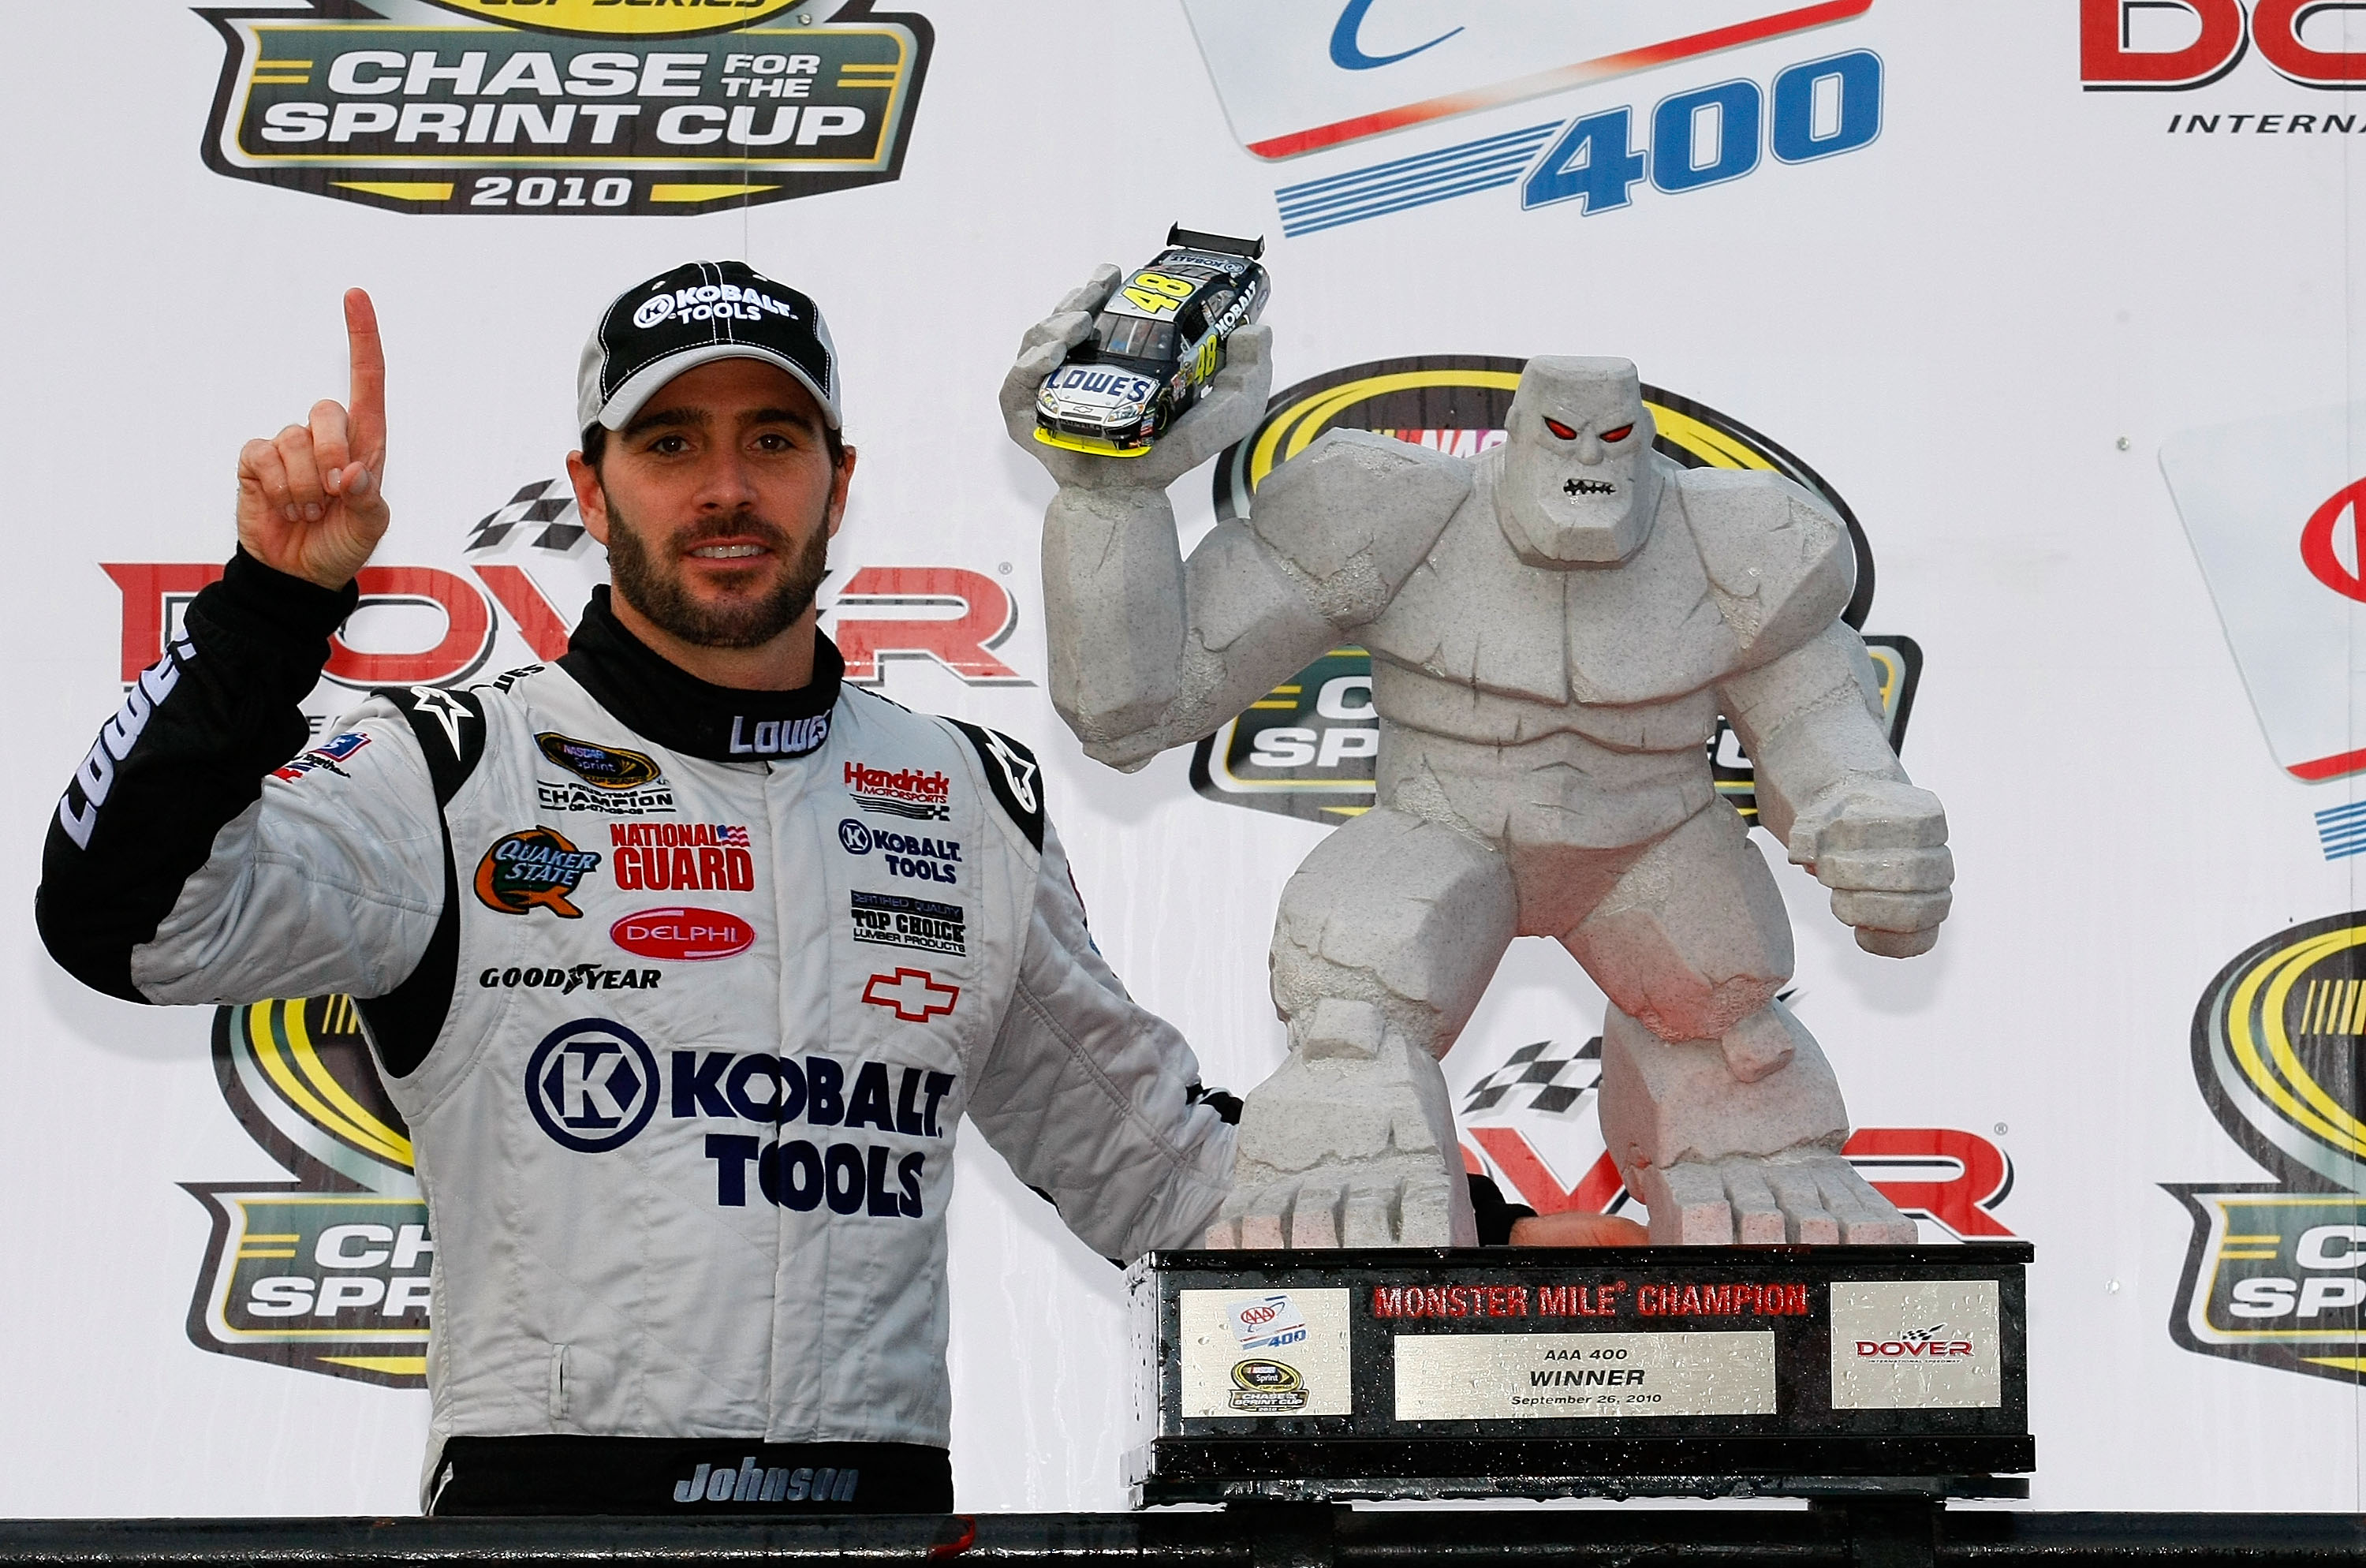 Jimmie Johnson's last win came at Dover in September.